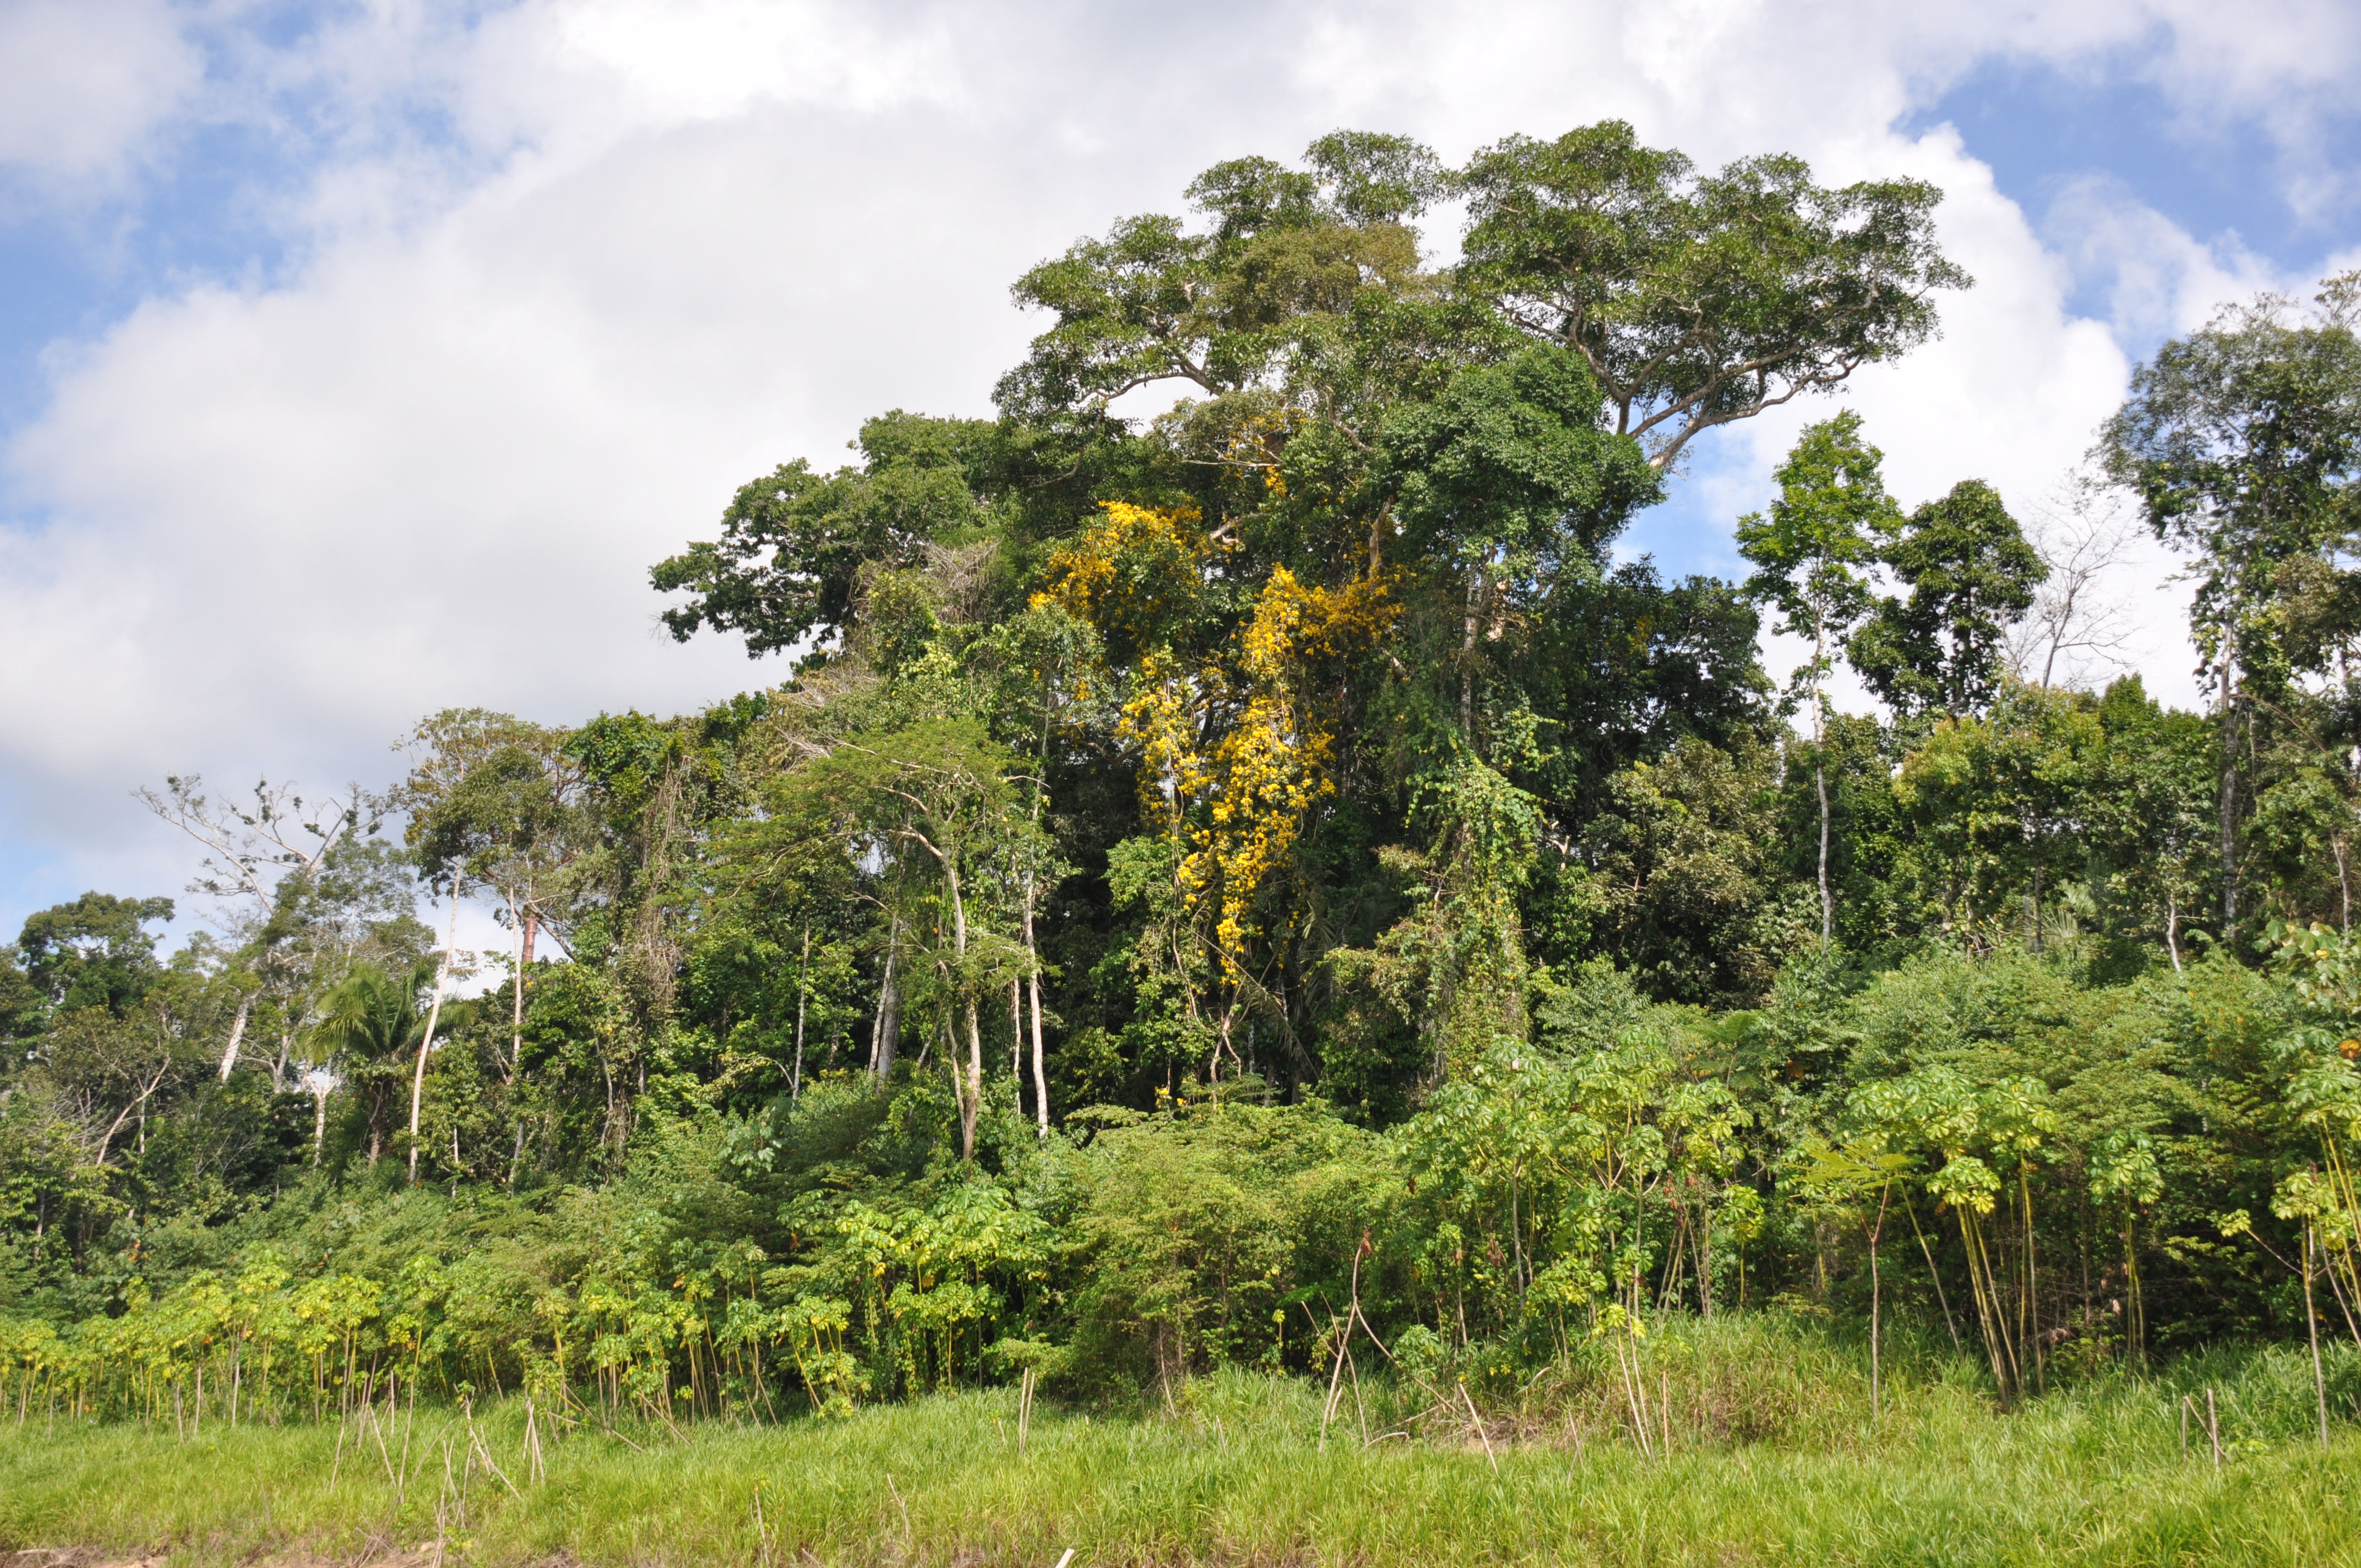 Helping to Save the Amazonian Rainforest